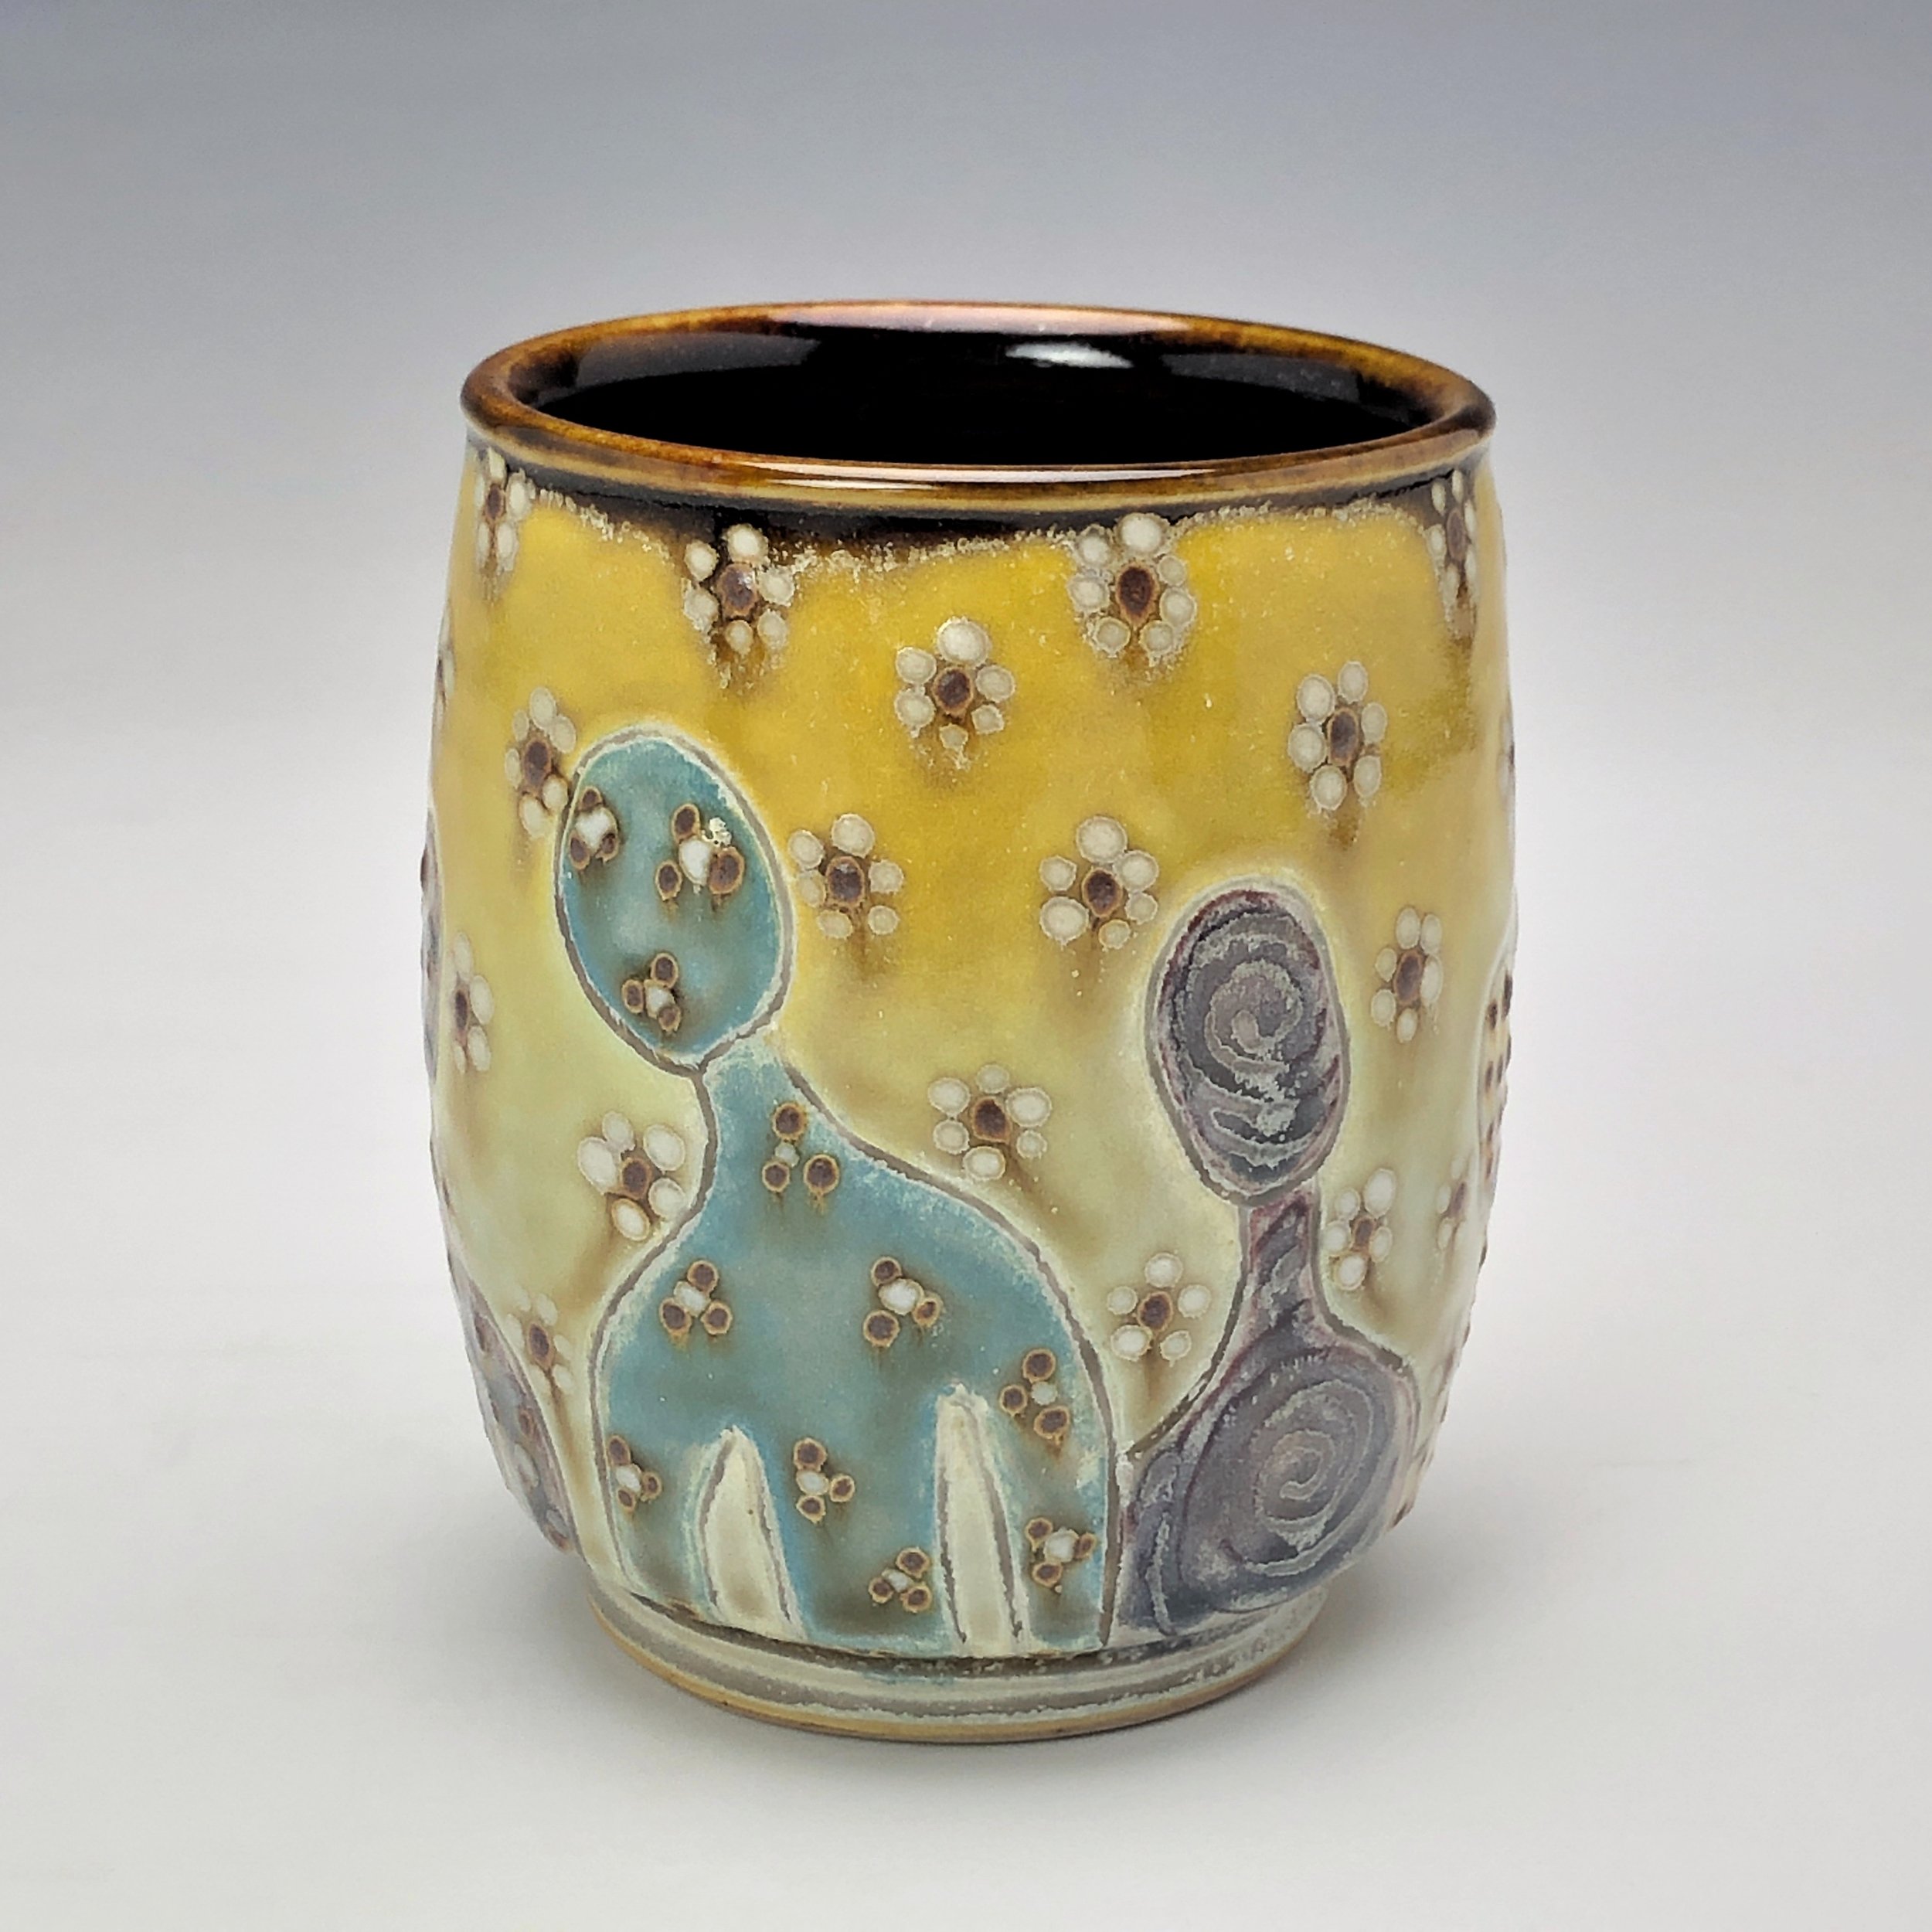  Samantha Henneke, Bulldog Pottery, Seagrove, North Carolina  Yunomi 1- Casual drinking cup made from a smooth white porcelaneous clay body. Figurative decoration with slip and glaze dot patterns. Translucent vellum glaze over various underglaze colo